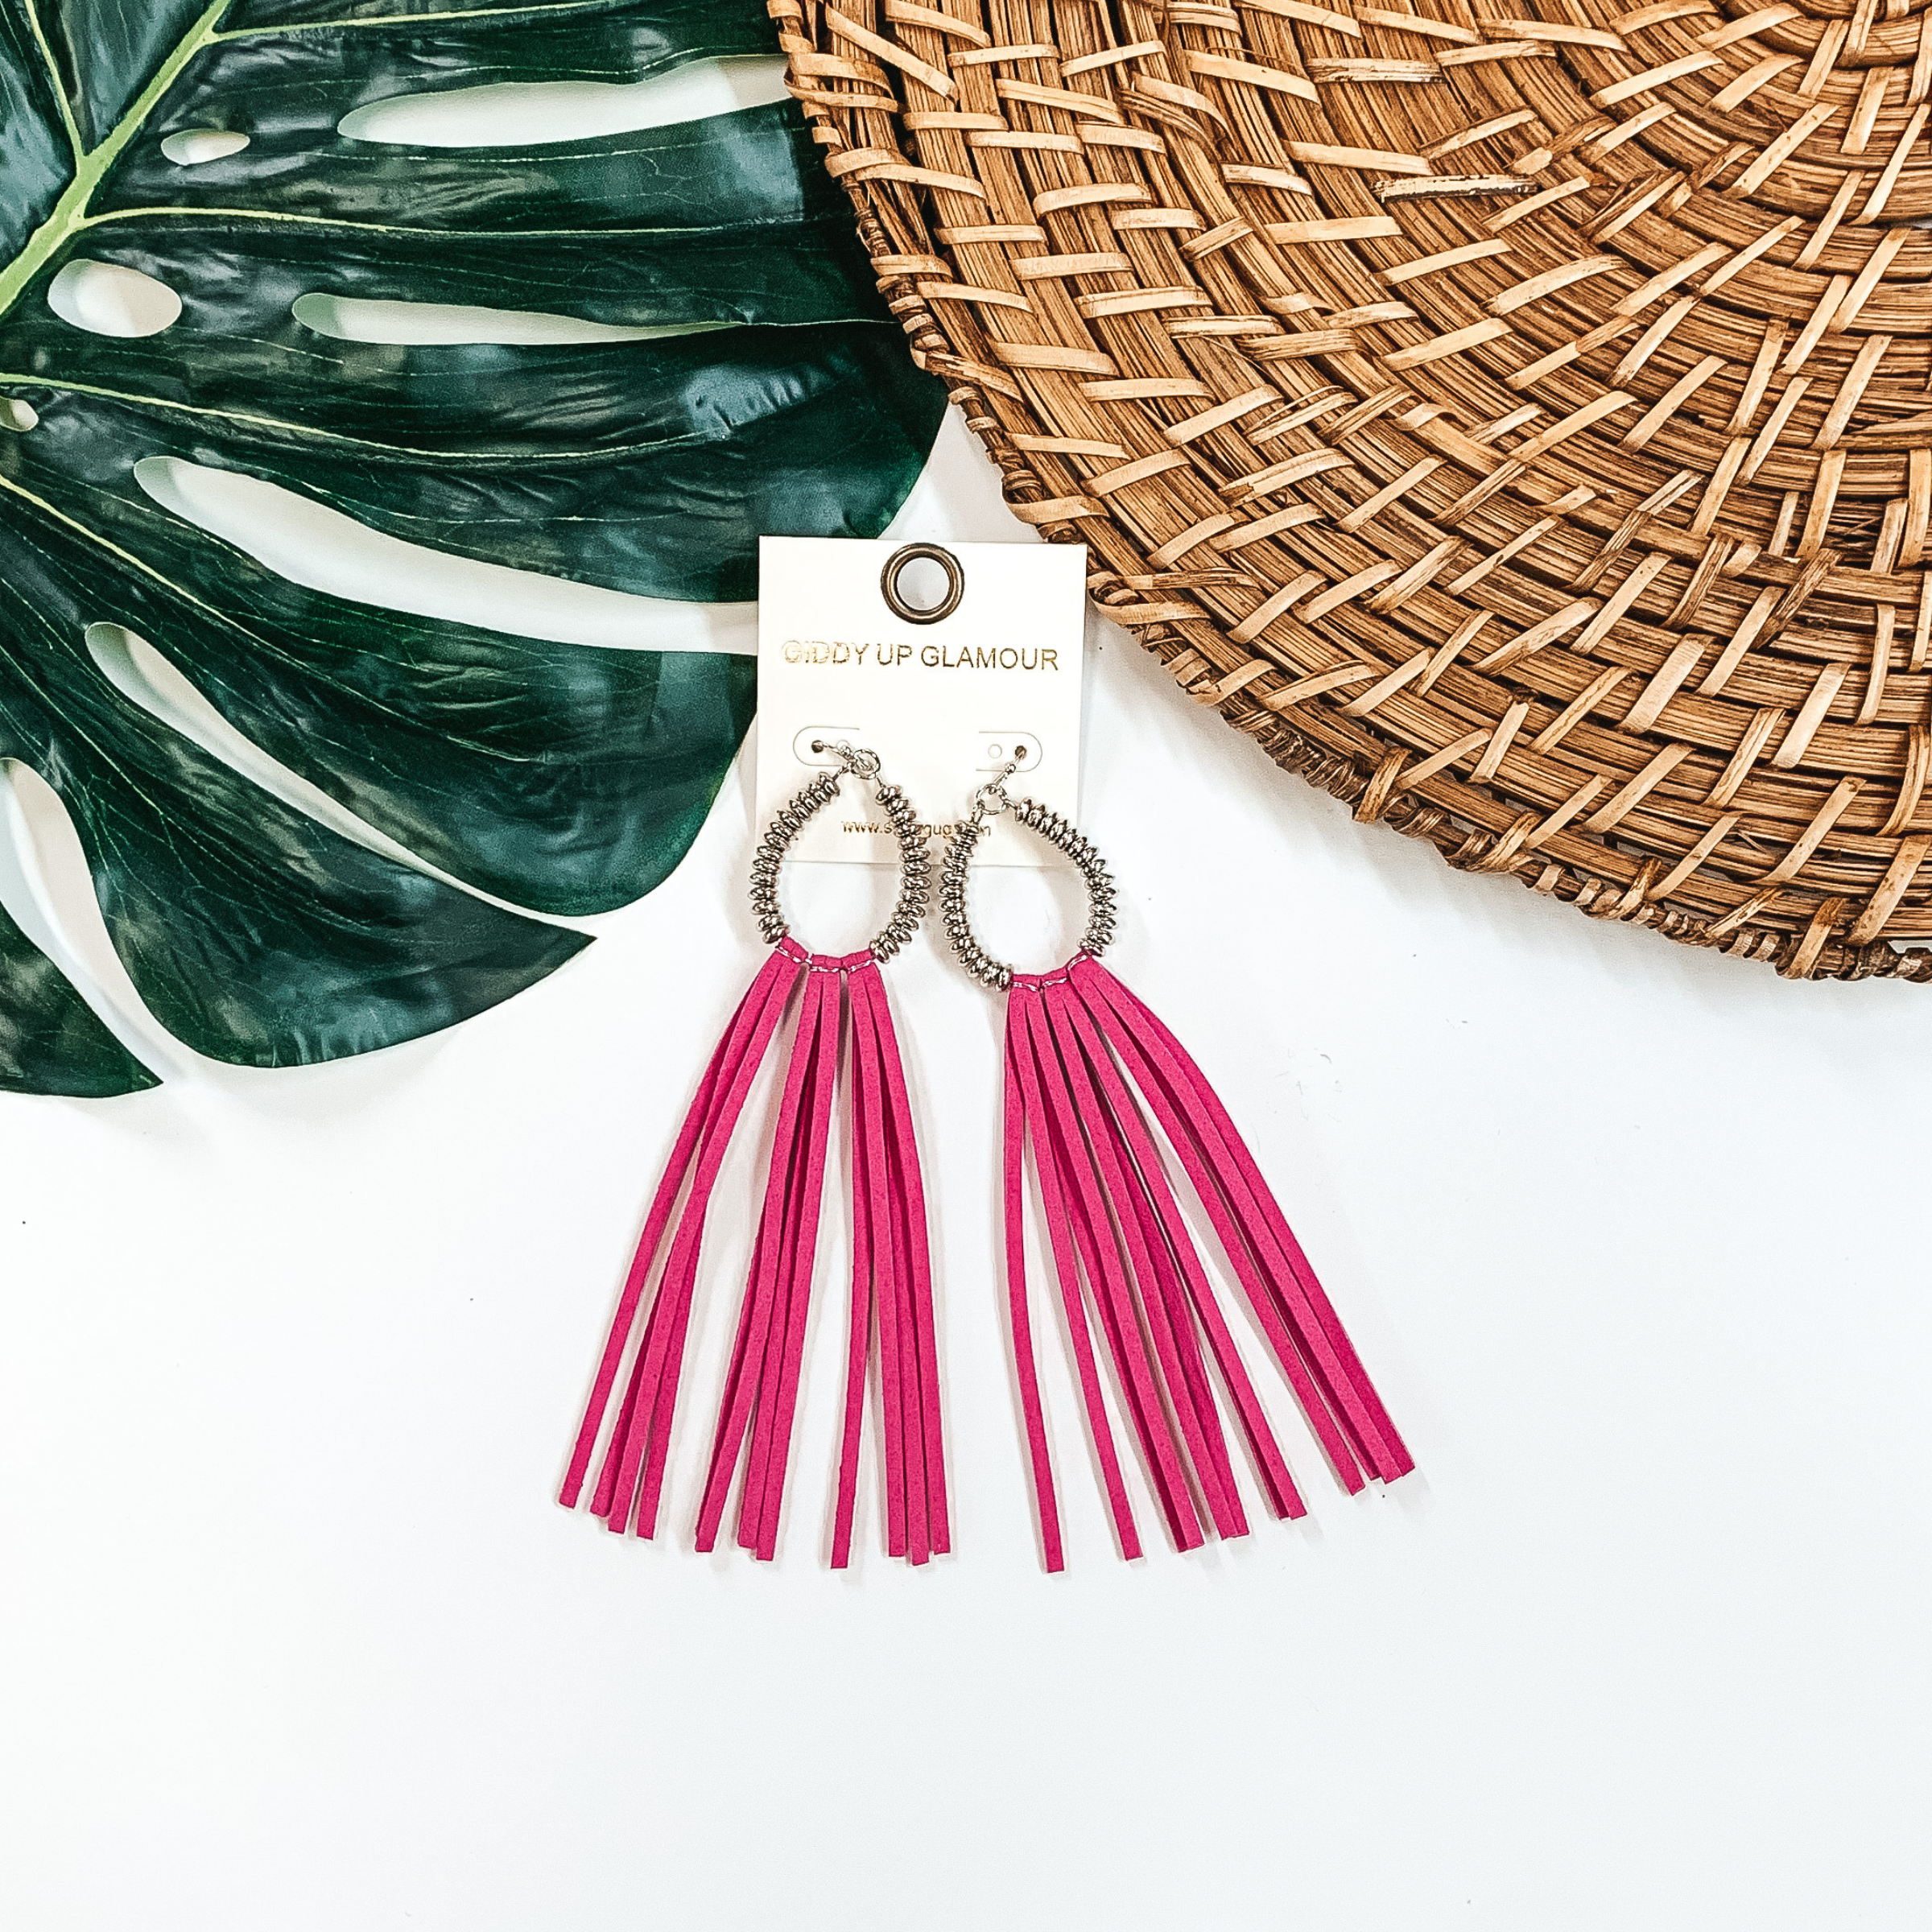 Silver Metal Beaded Hoop Earrings with Fuchsia Tassels - Giddy Up Glamour Boutique